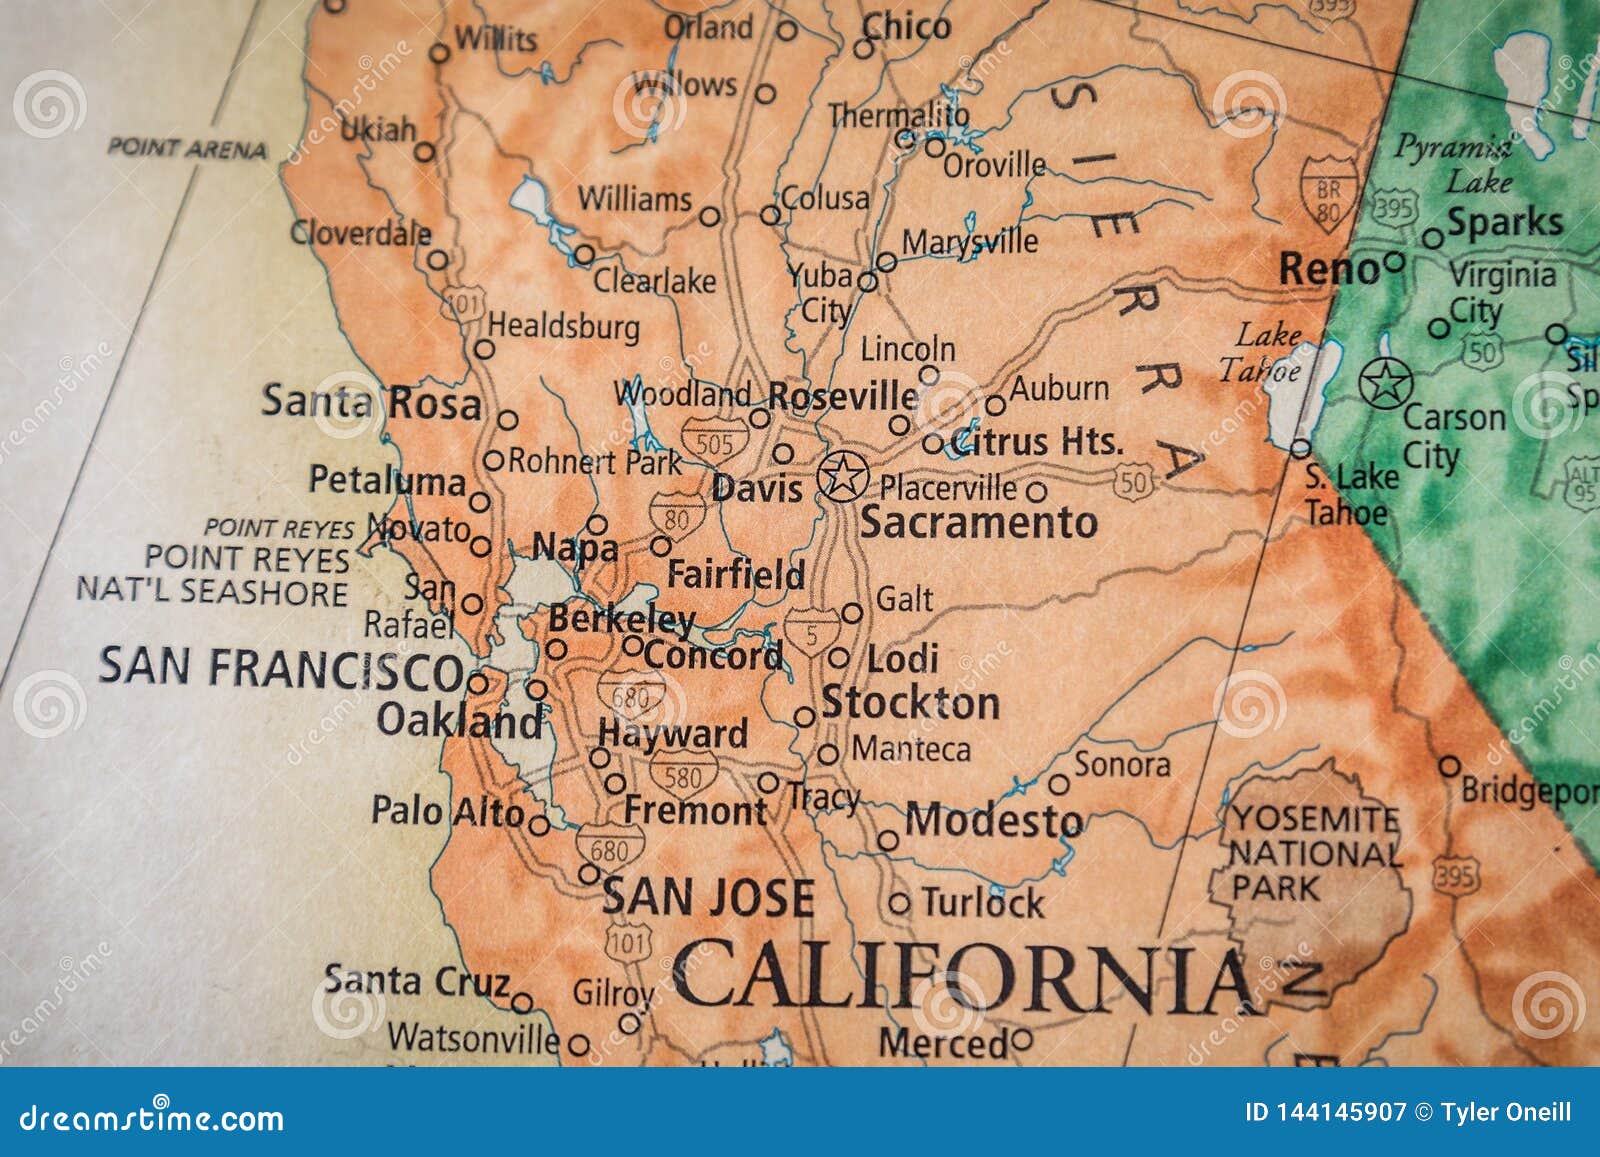 selective focus of north california san francisco on a geographical and political state map of the usa